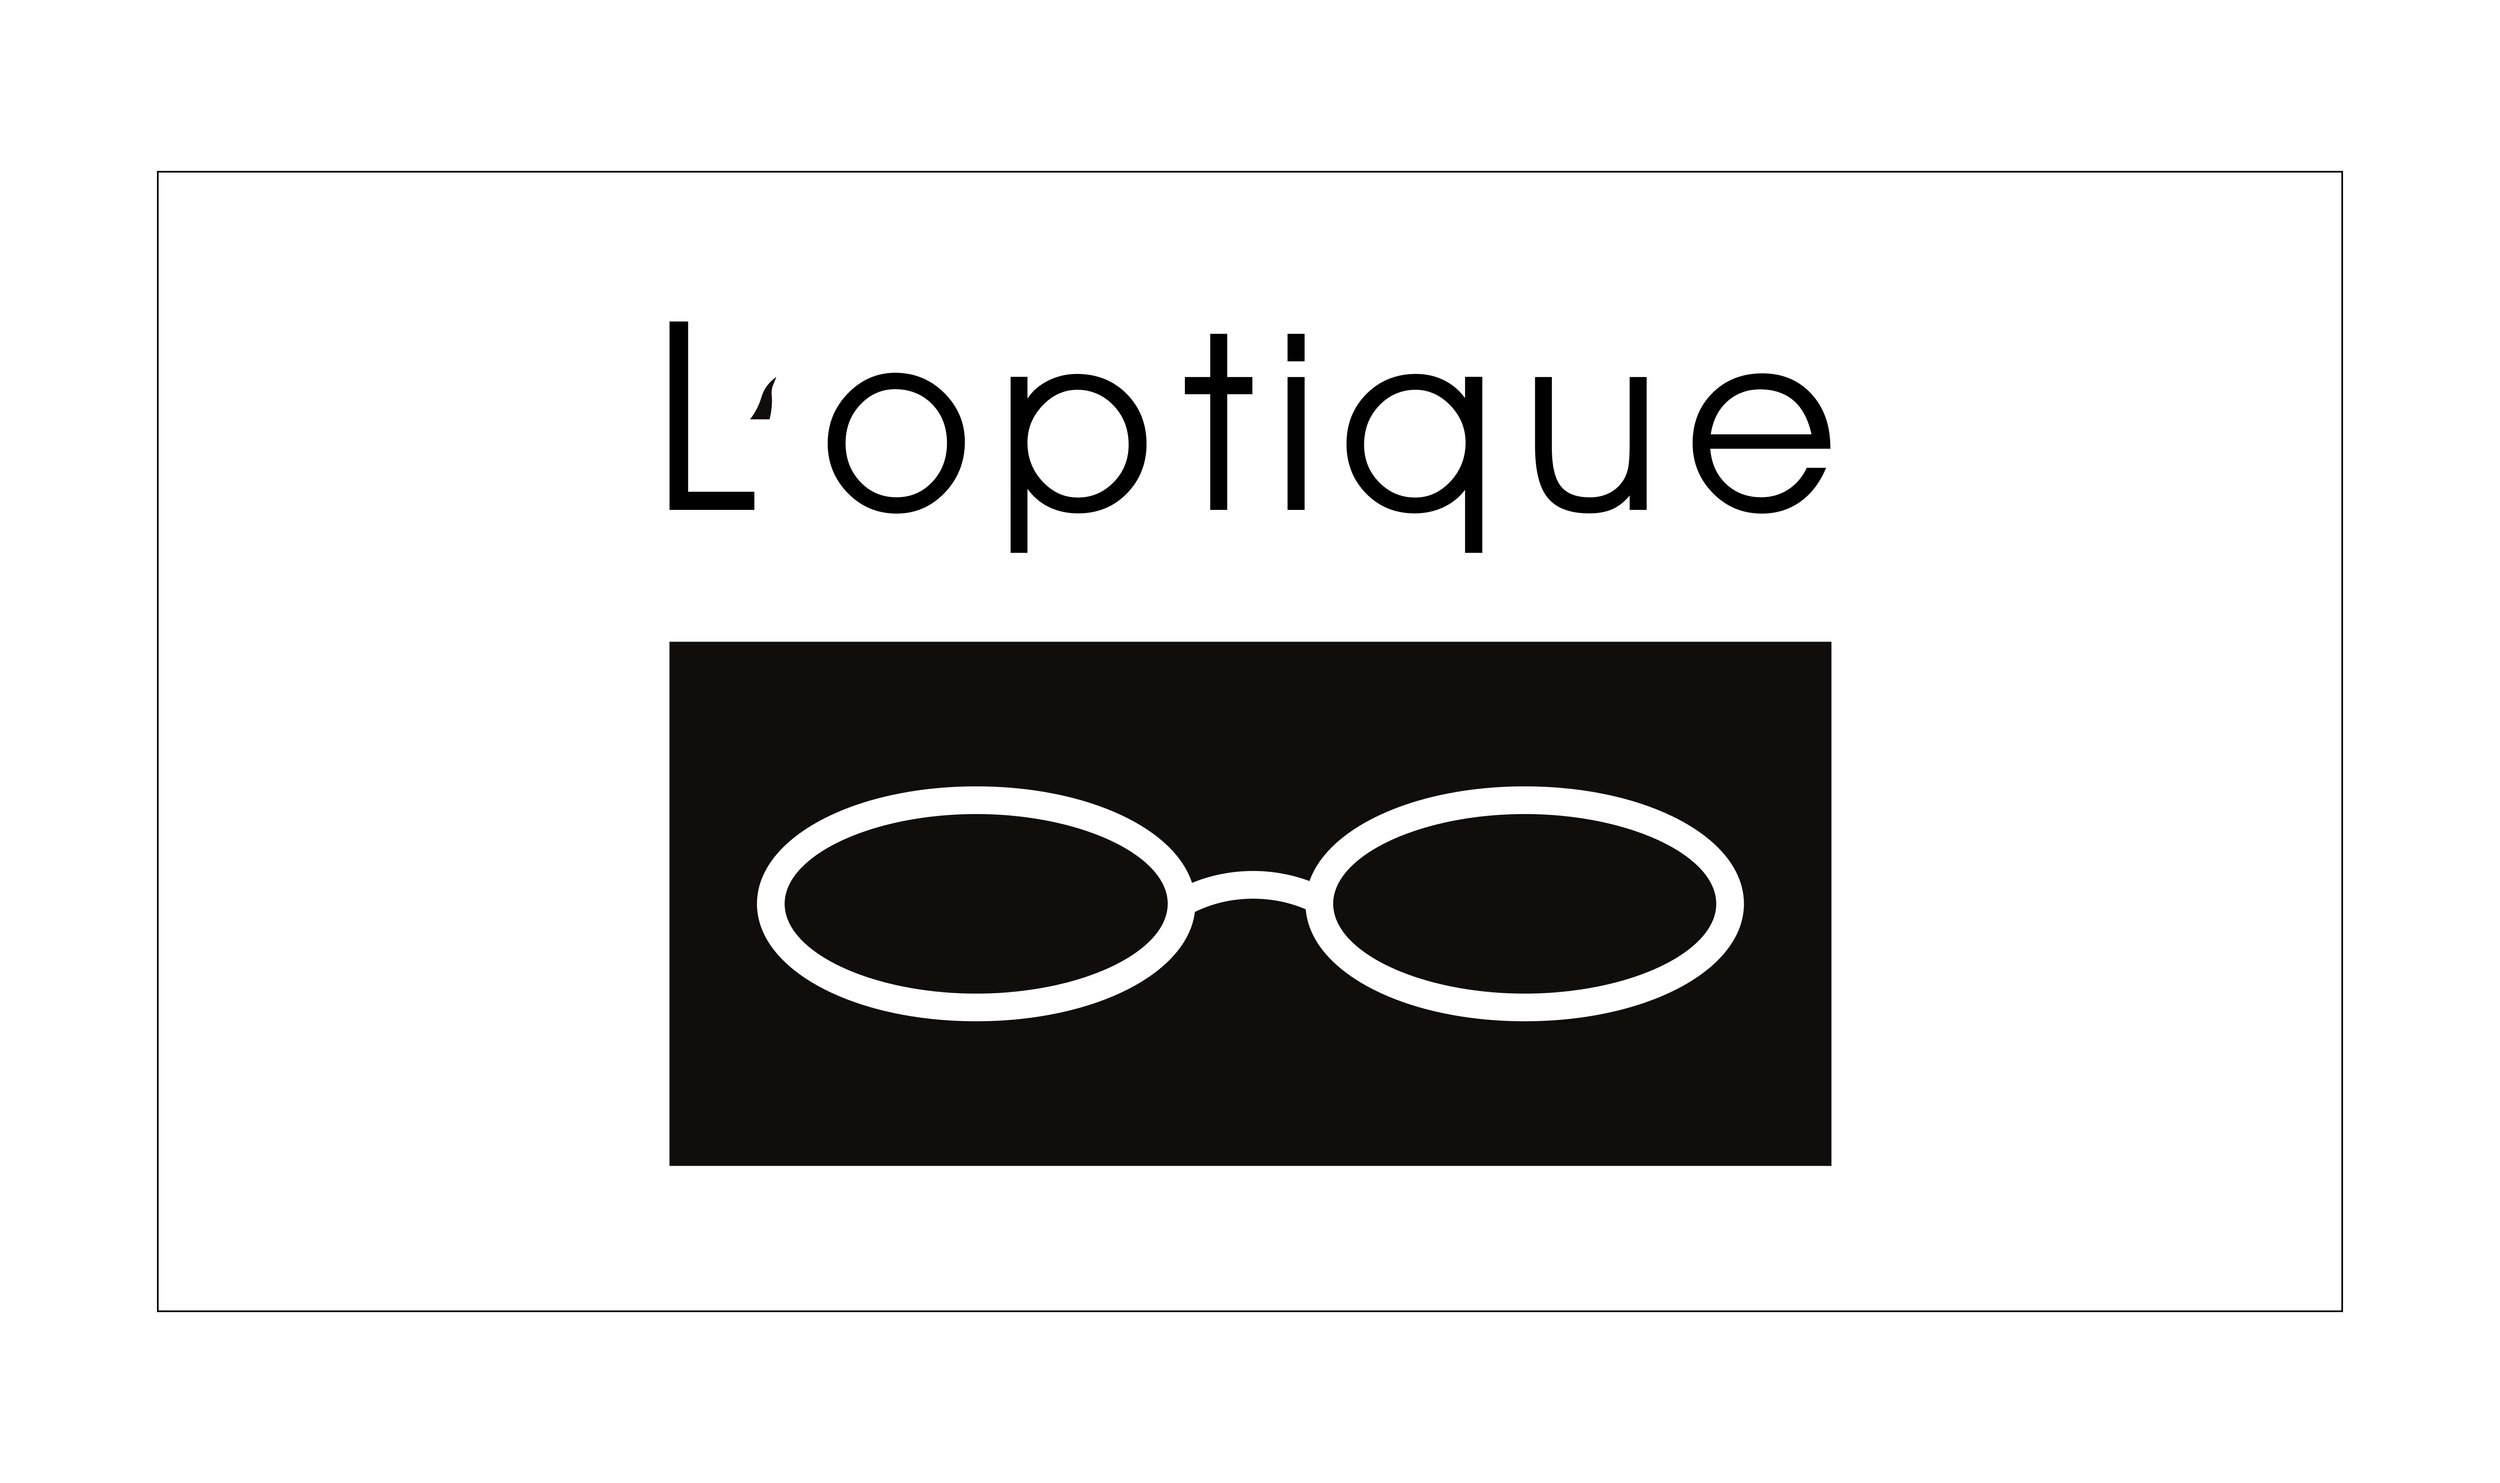 Lopotique Sign.jpg